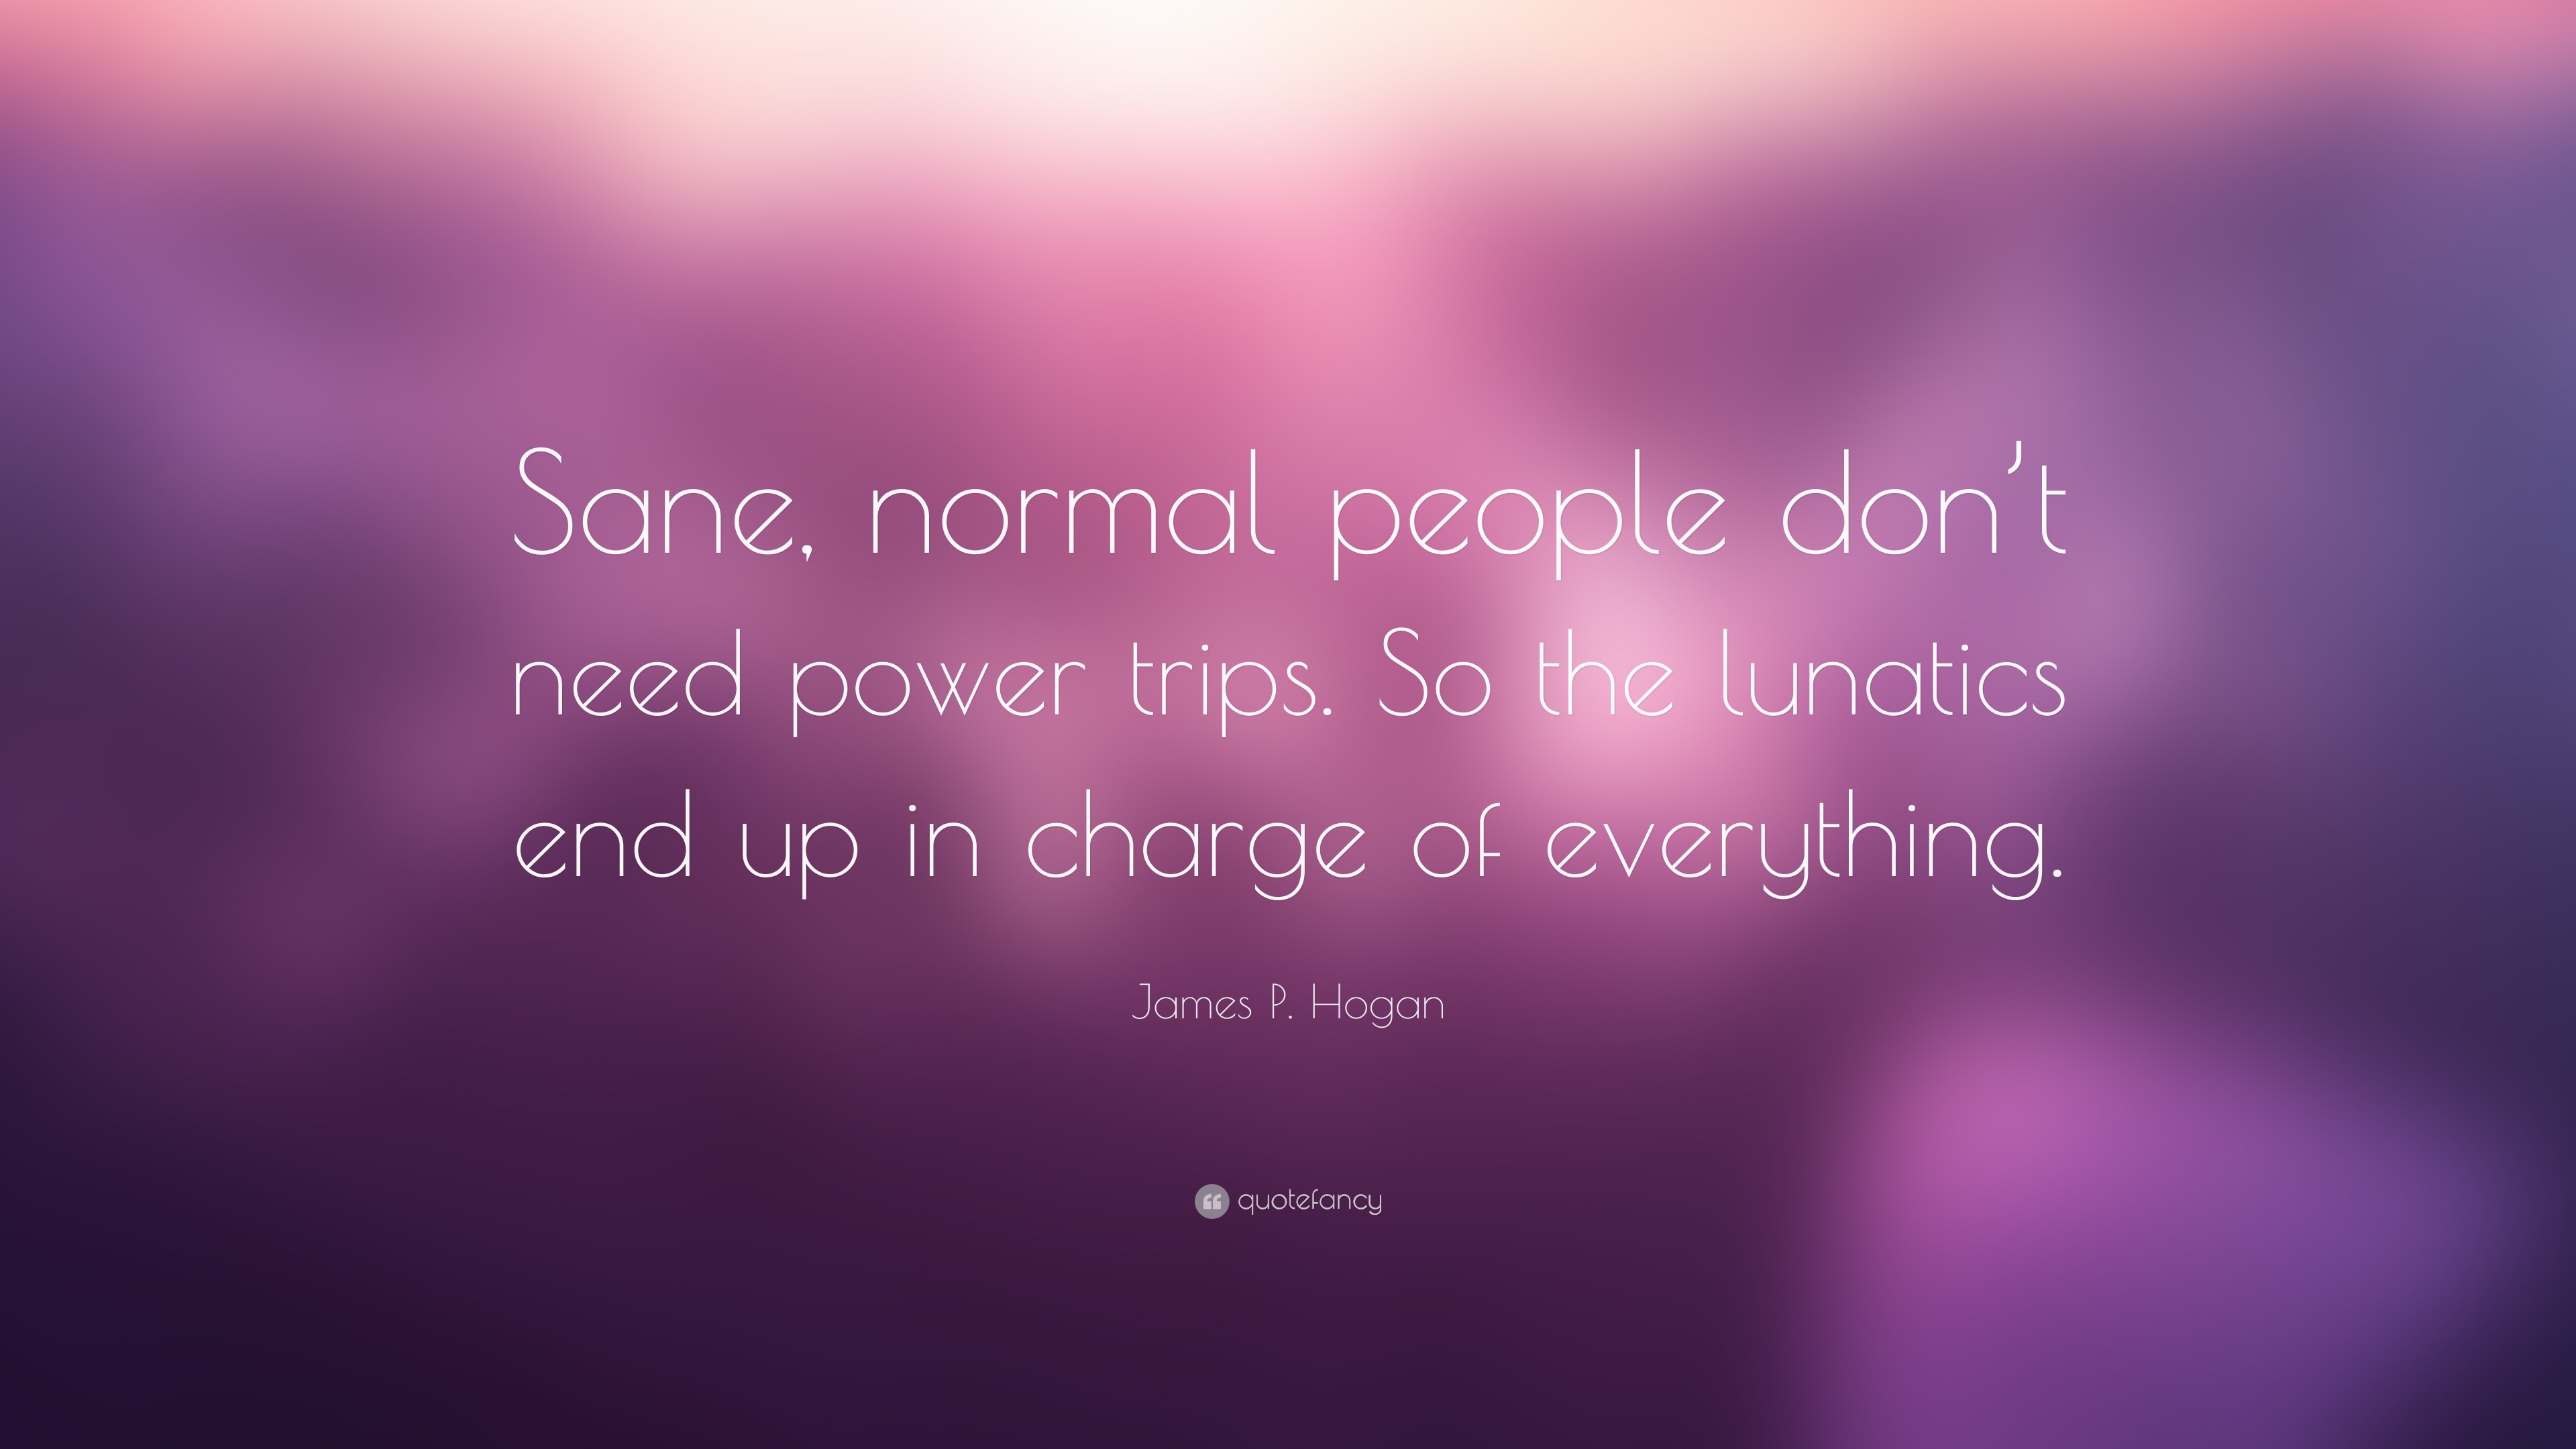 James P. Hogan Quote: “Sane, normal people don't need power trips